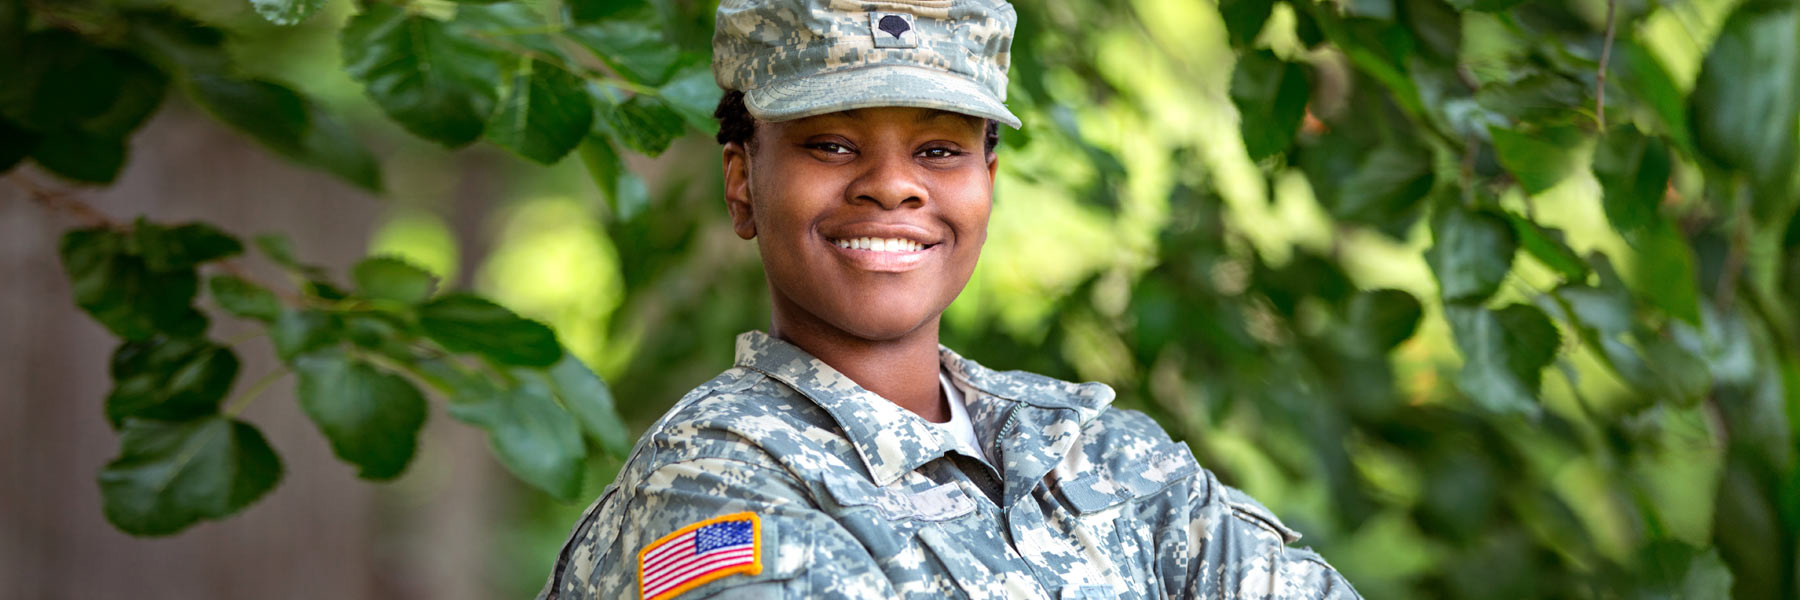 a woman smiling in a camouflage US army uniform